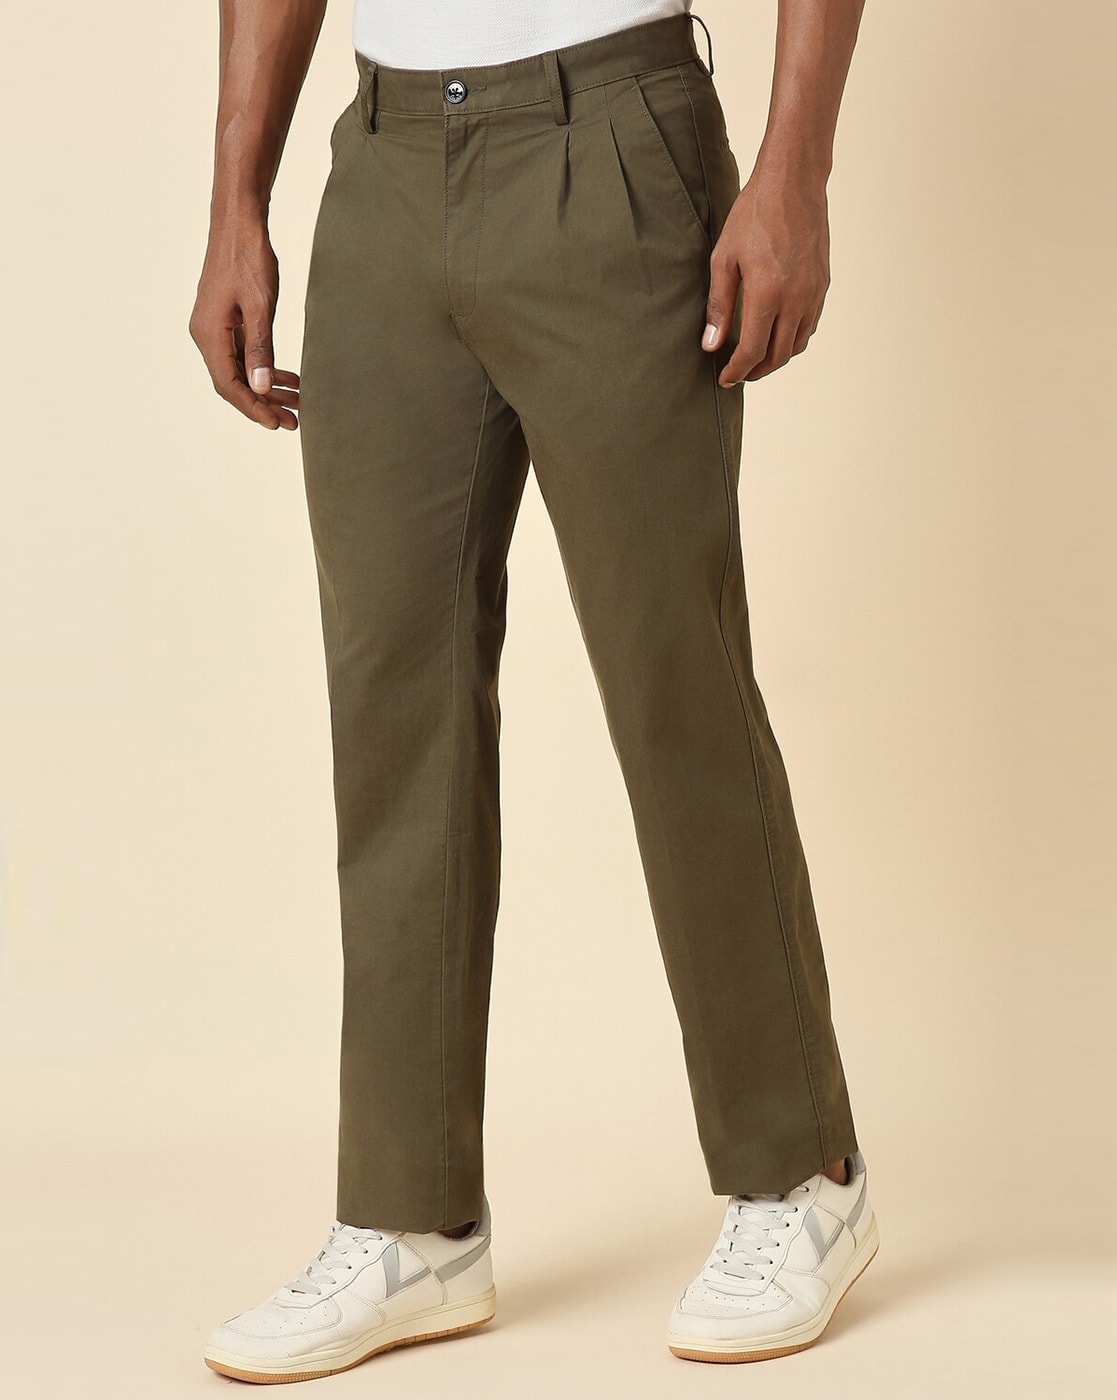 Buy ALLEN SOLLY Khaki Mens Slim Fit Solid Trousers | Shoppers Stop